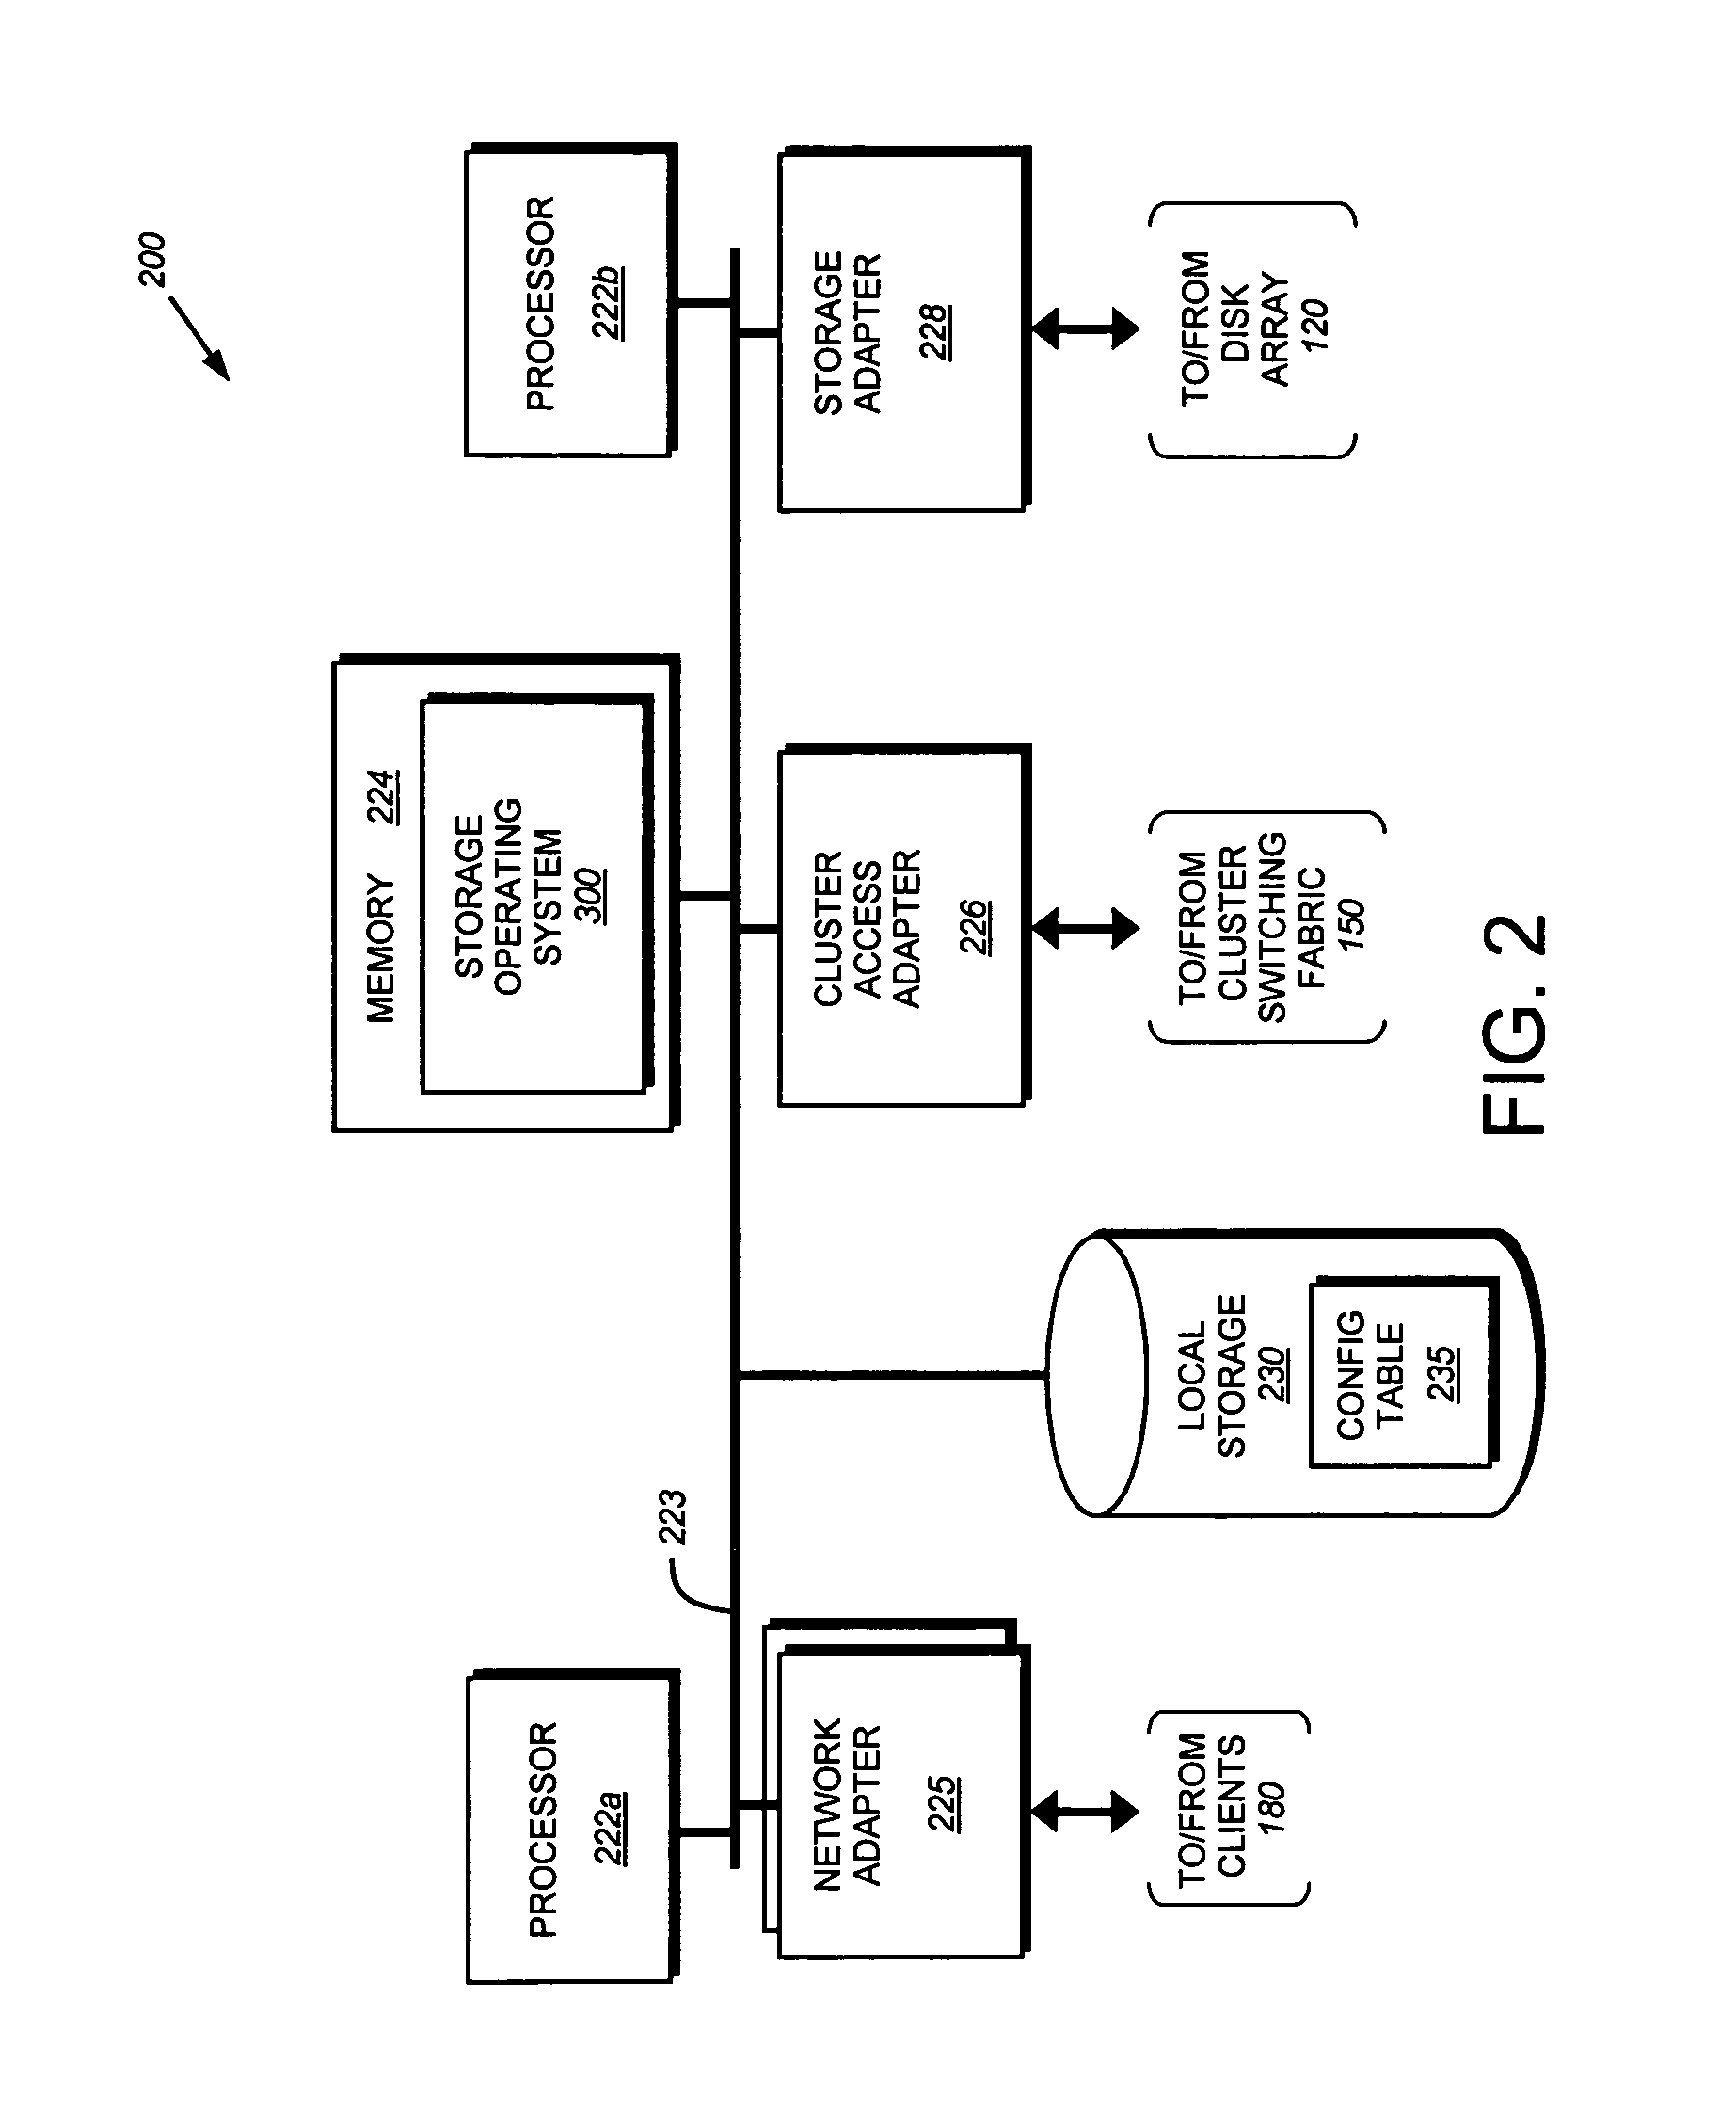 System and method for histogram based chatter suppression